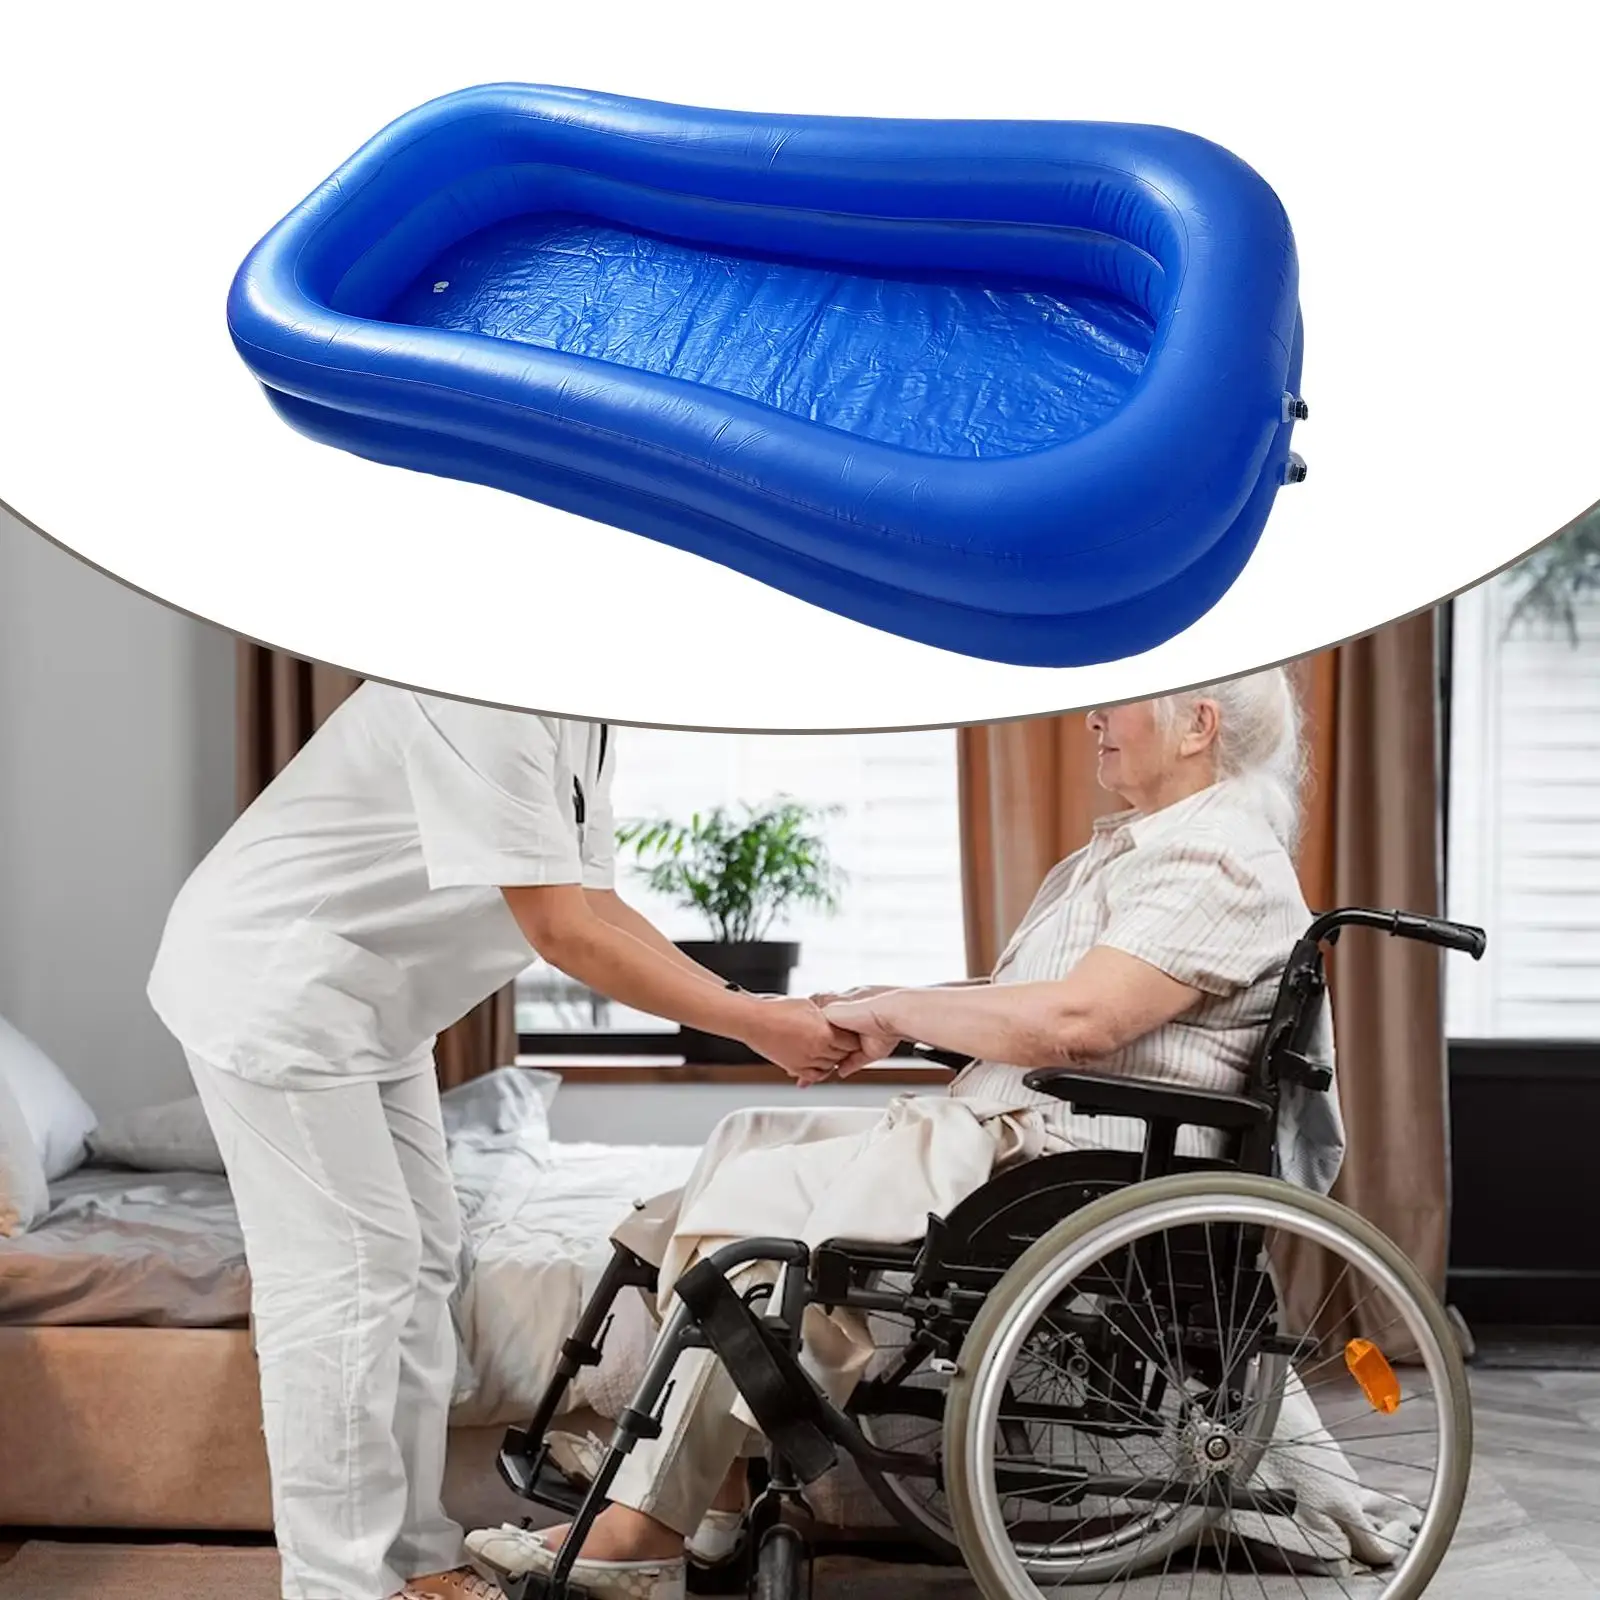 Inflatable Bathtub Portable Foldable Bath in Bed Body Washing Basin System for Disabled Elderly Bedridden Handicapped Adults